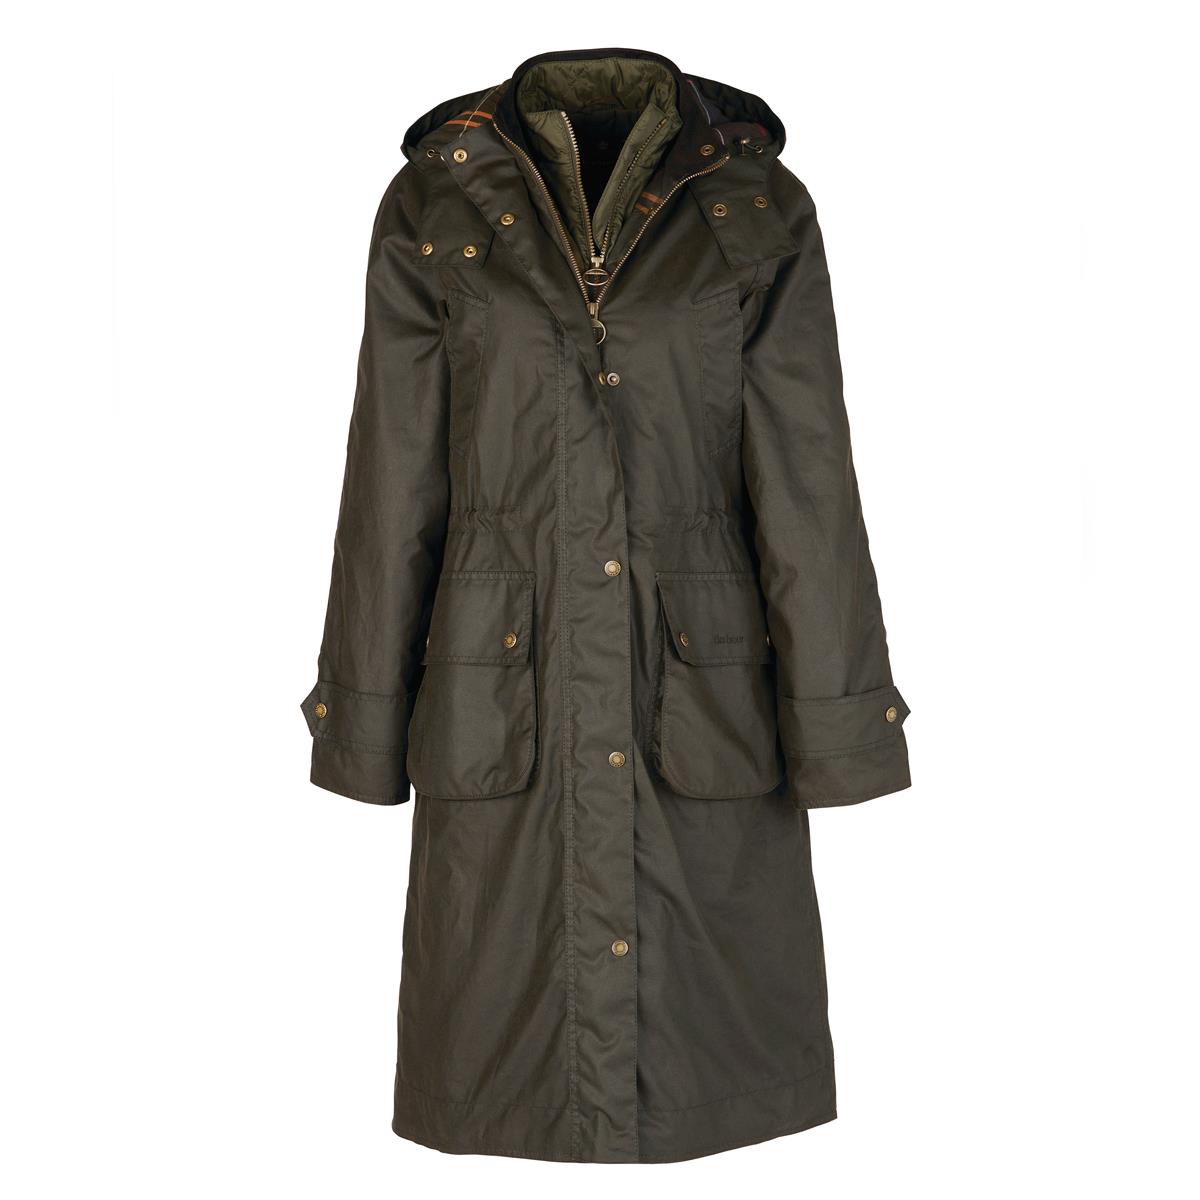 What is the recommended cleaning method for the Barbour Cannich Wax Jacket?